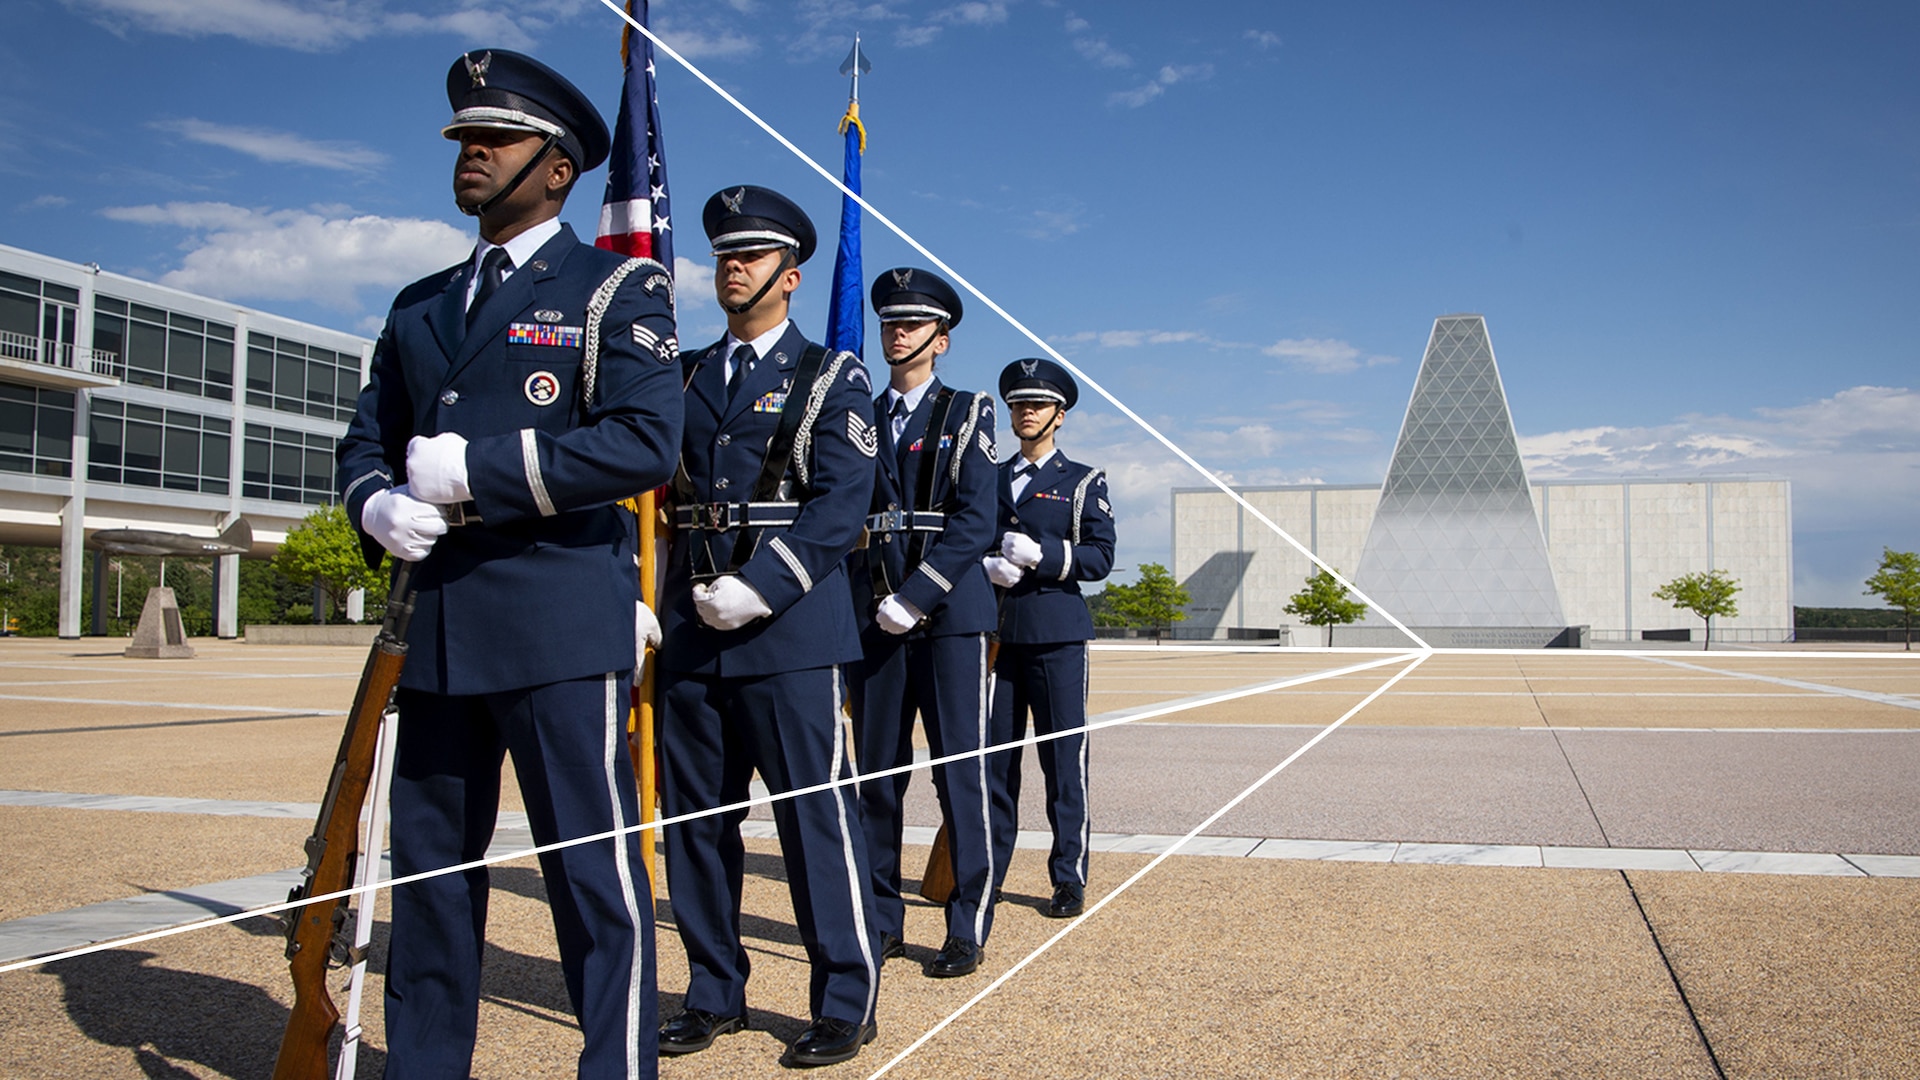 color guard standing on a plaza in the daytime. Multiple diagonal lines have been layered to show how triangles have been created.